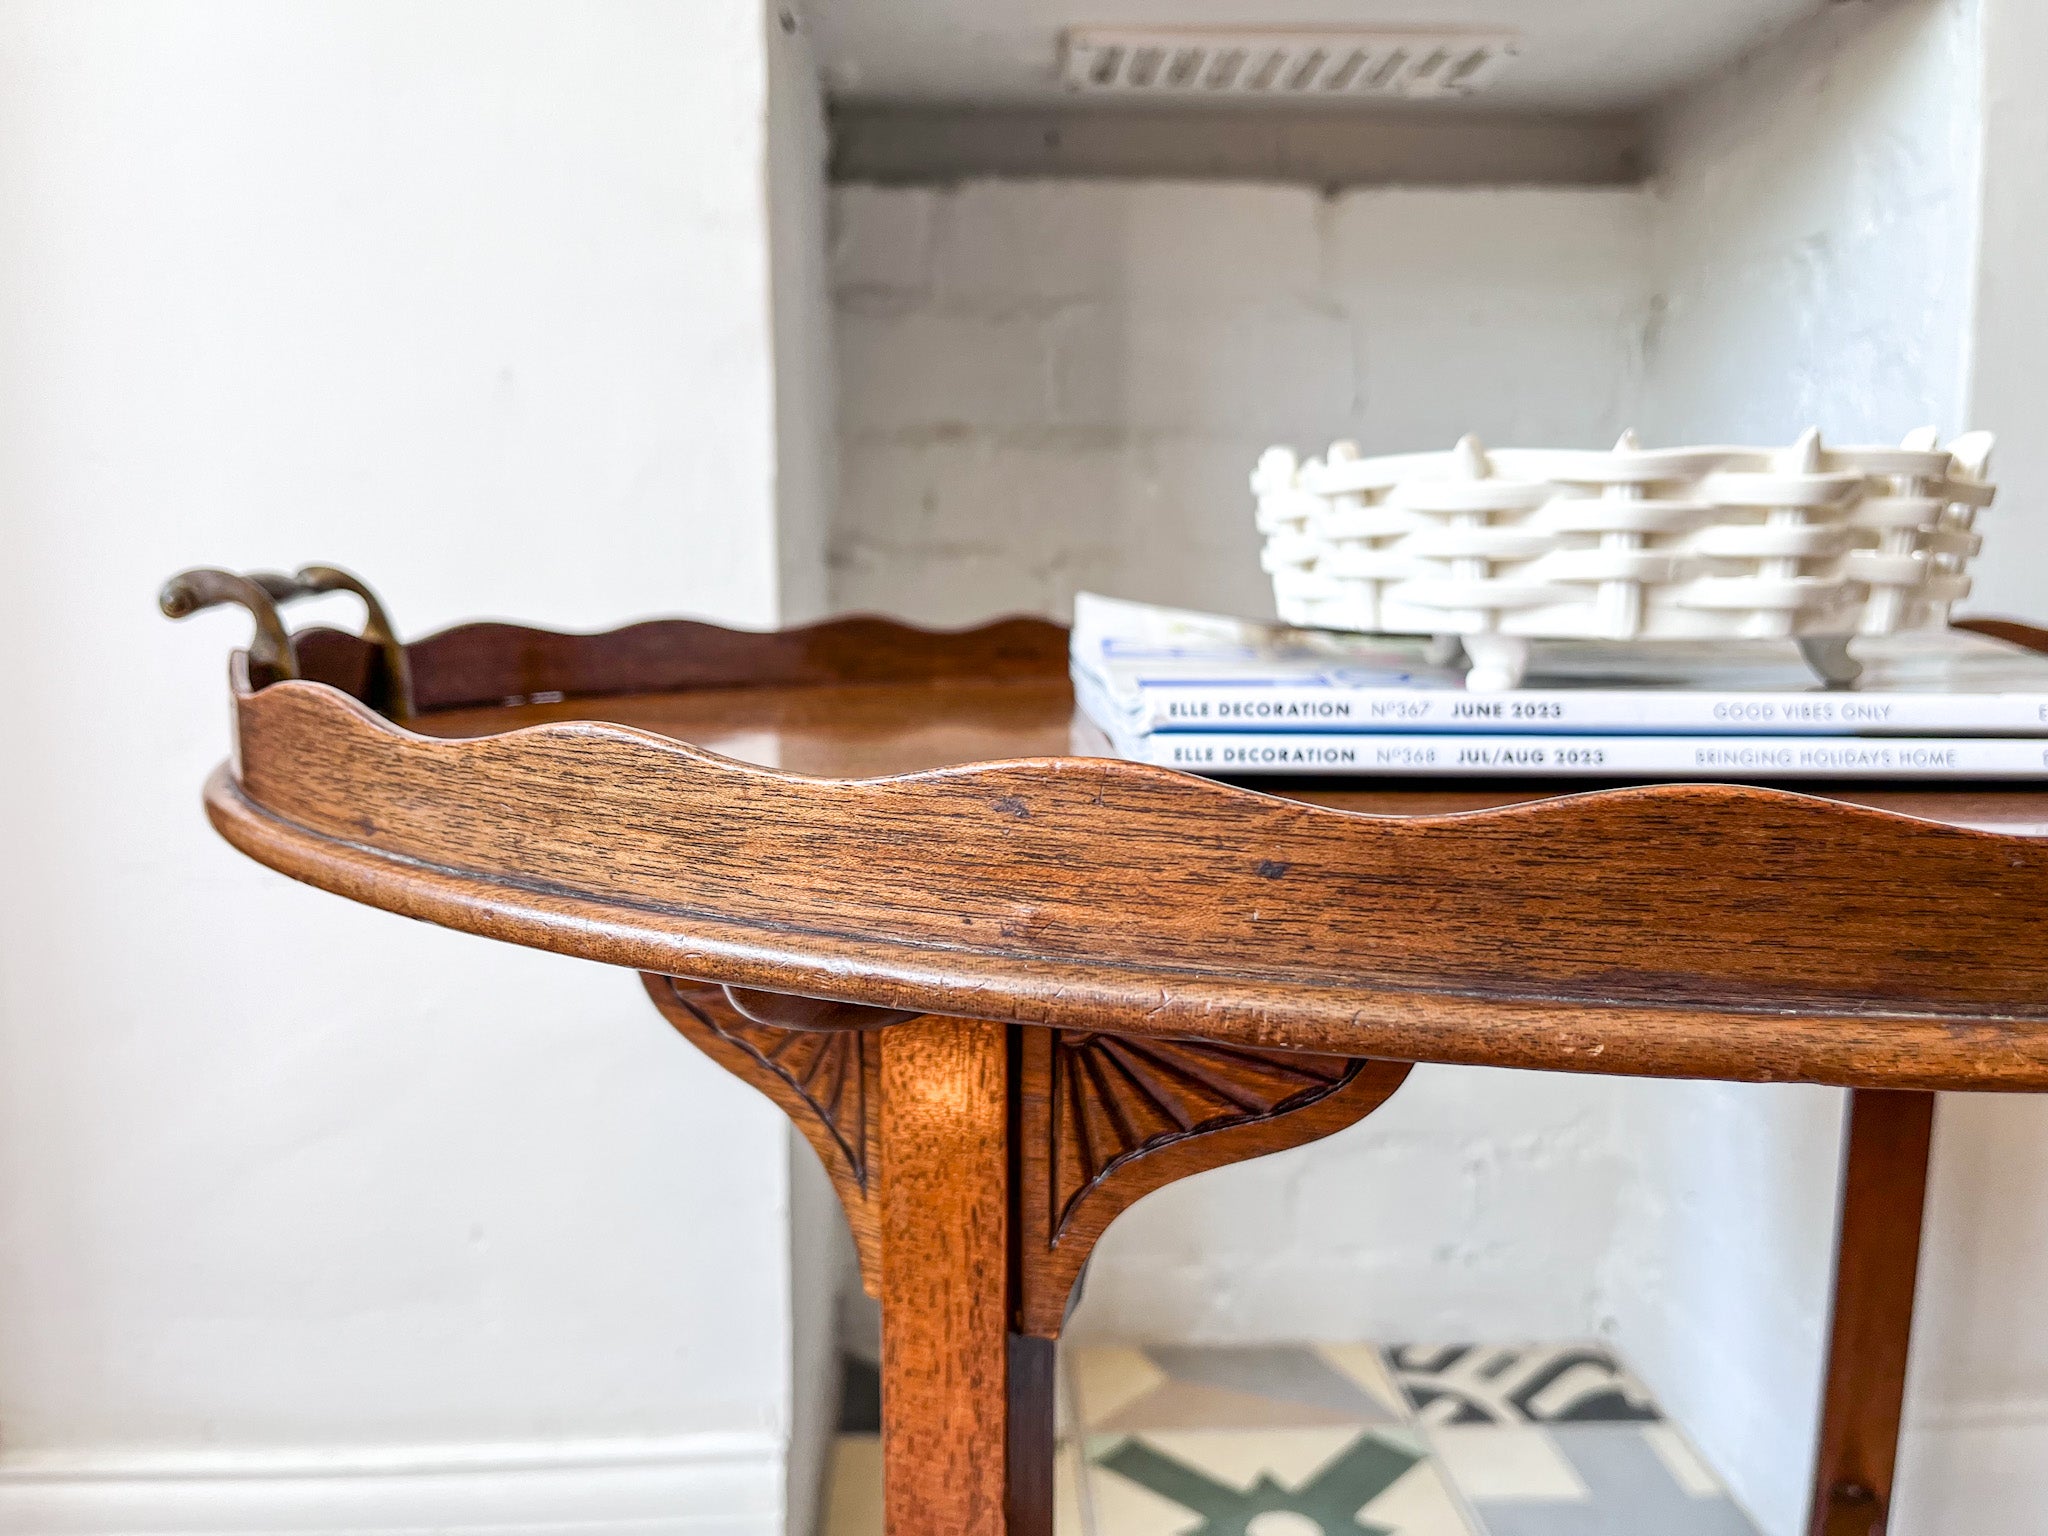 Vintage Scalloped Oval Tray Table